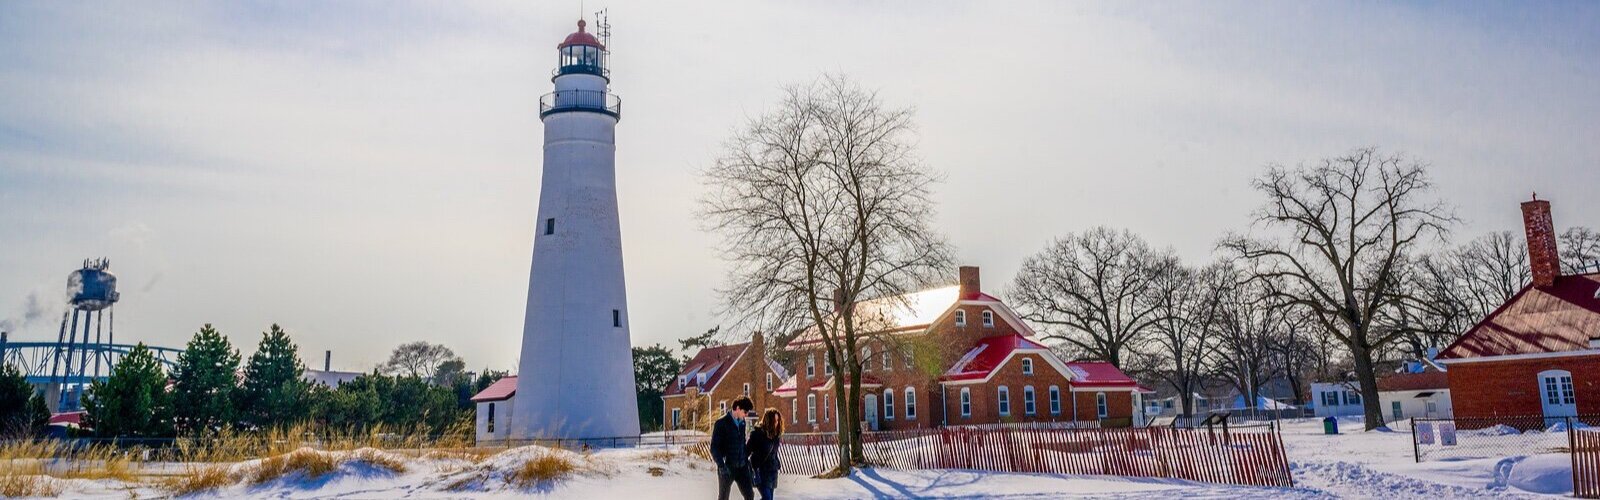 The Fort Gratiot Lighthouse in Port Huron, along the Bridge to Bay Trail